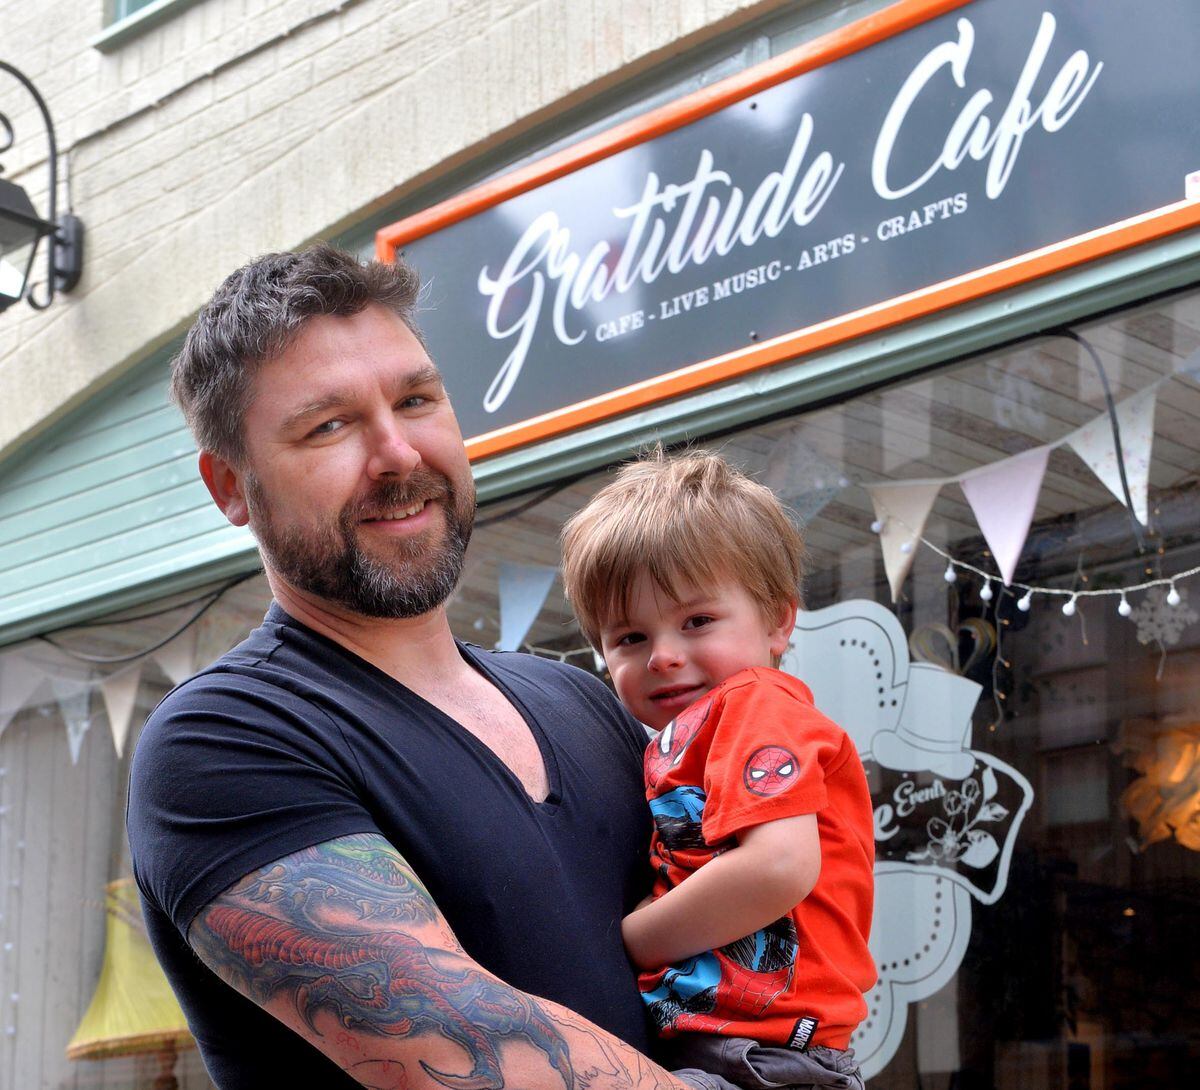 Dave Busby, one of the owners of the Gratitude Cafe, with his son Solomon